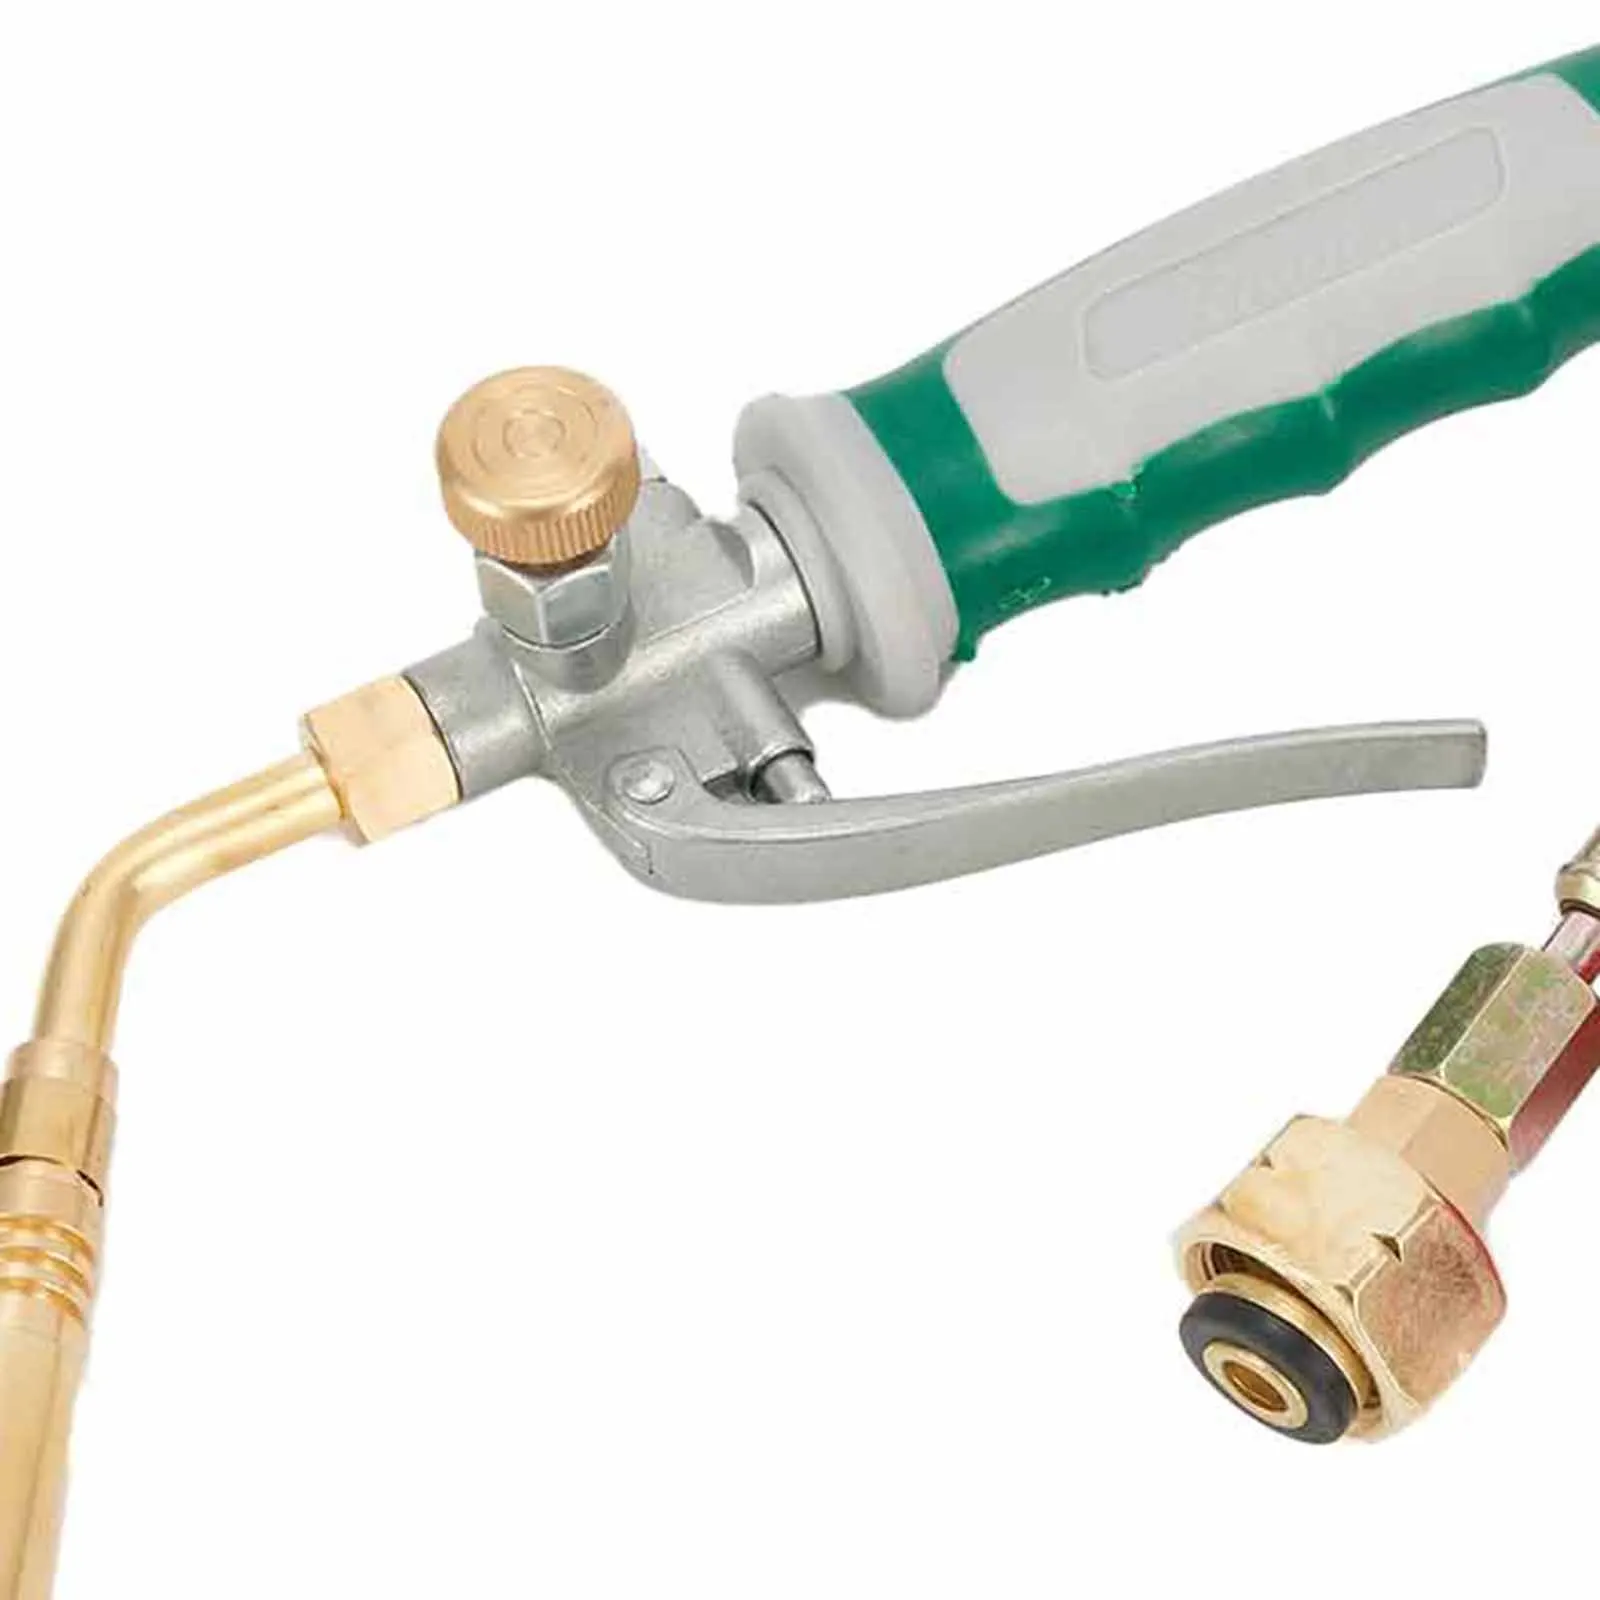 

Tool Welding Torch Outdoor Convenient Copper Adjustment Switch Brass Flamethrower For Soldering With 63inch Hose